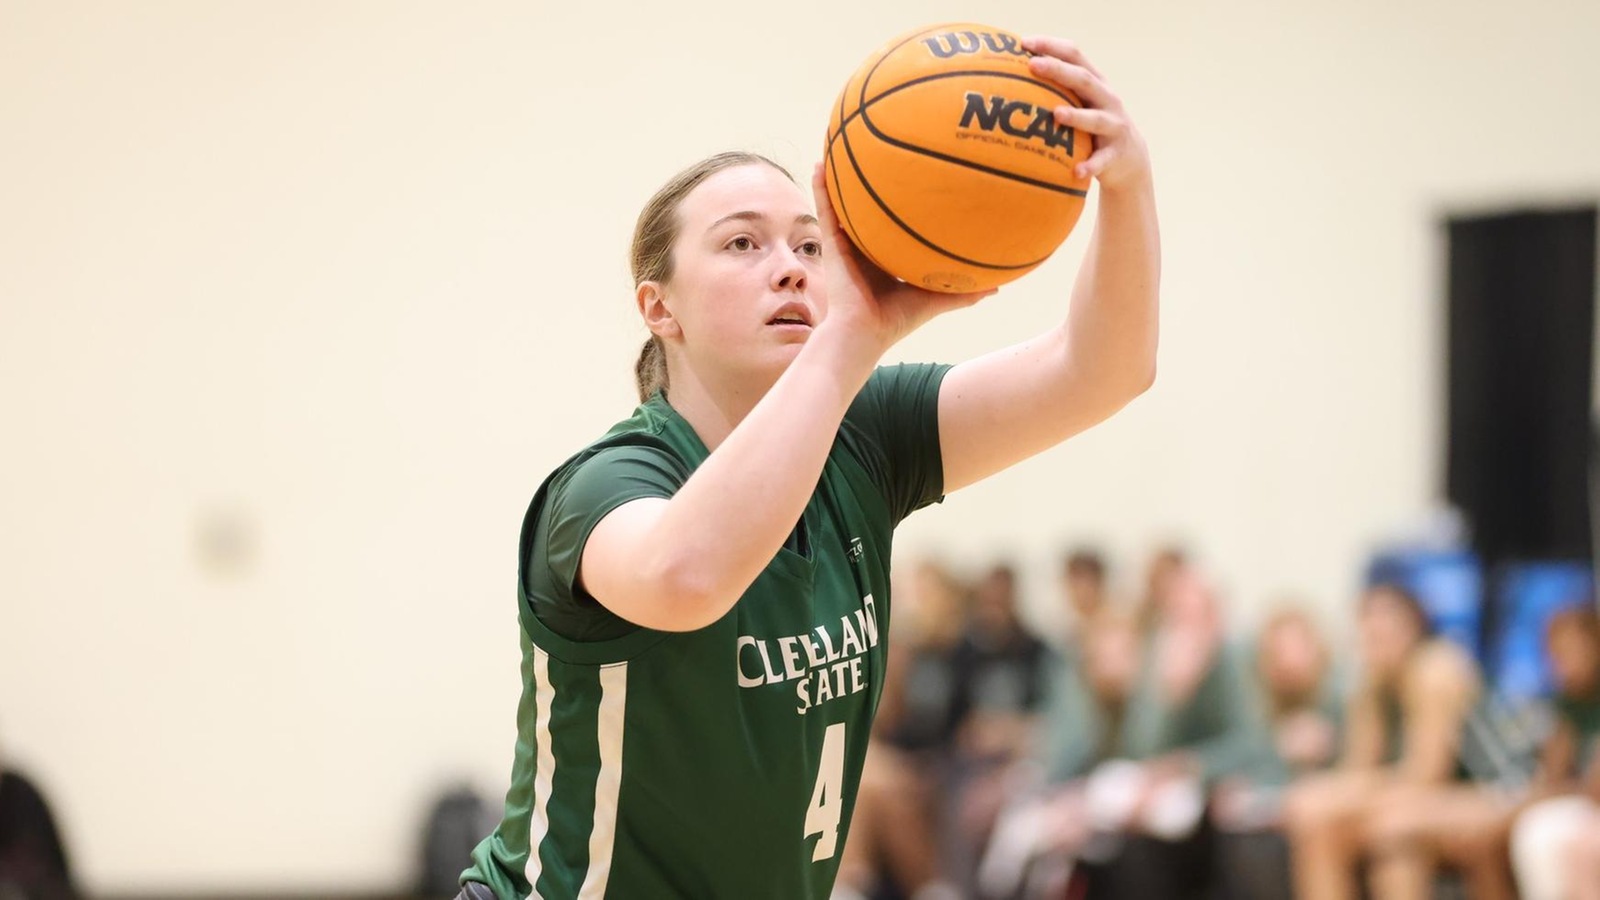 Cleveland State Women's Basketball Travels To RMU For Saturday Contest